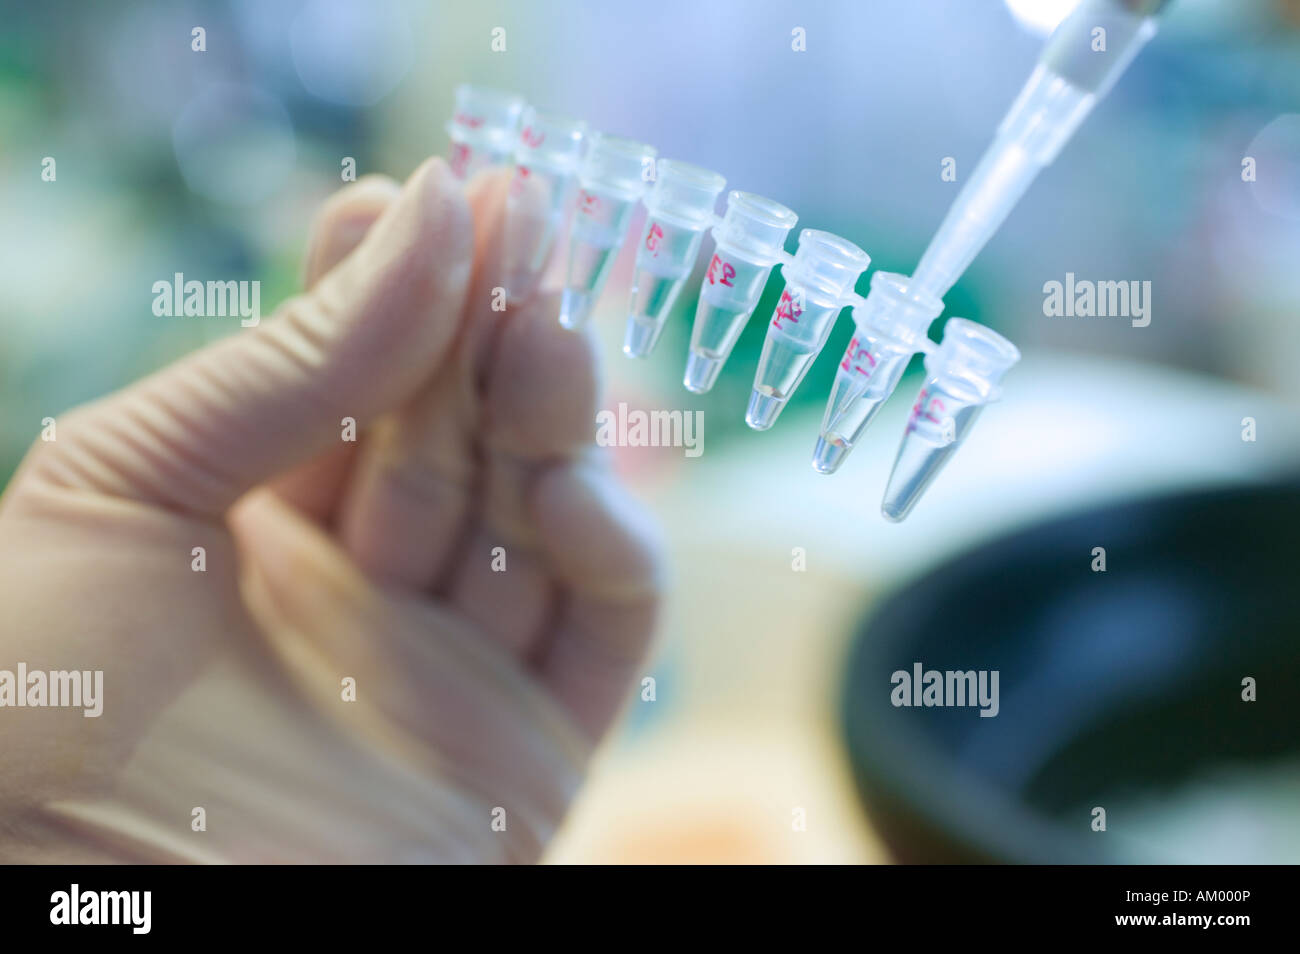 Medical researcher using a pipette to apply a sample into a micro centrifuge tube Stock Photo